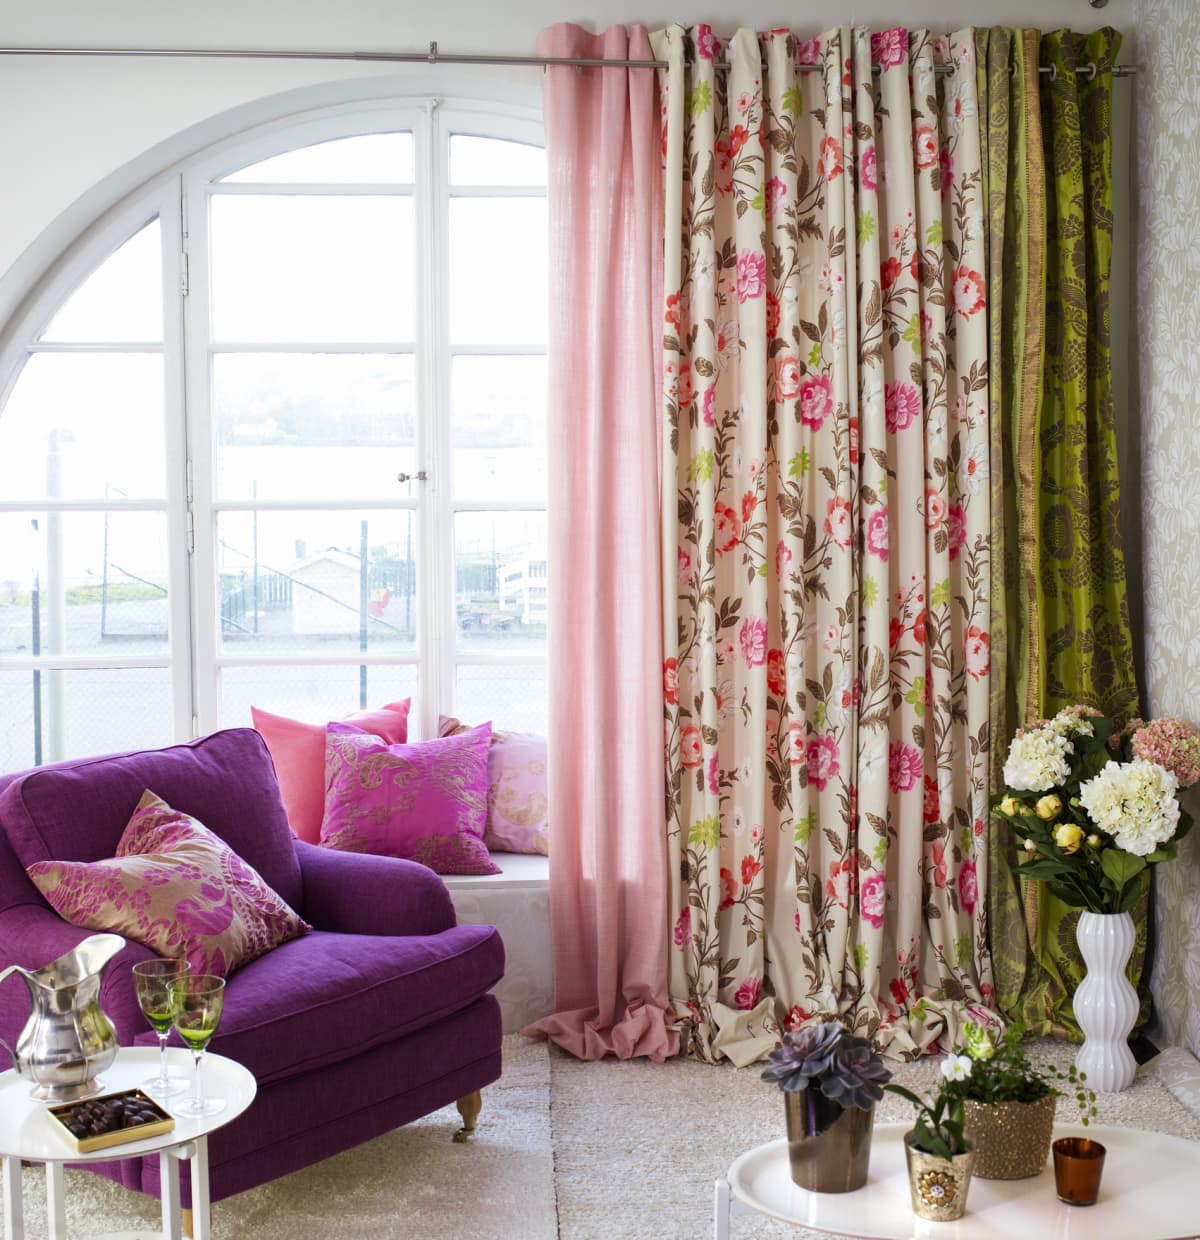 Bedroom with pink floral curtains and purple chair